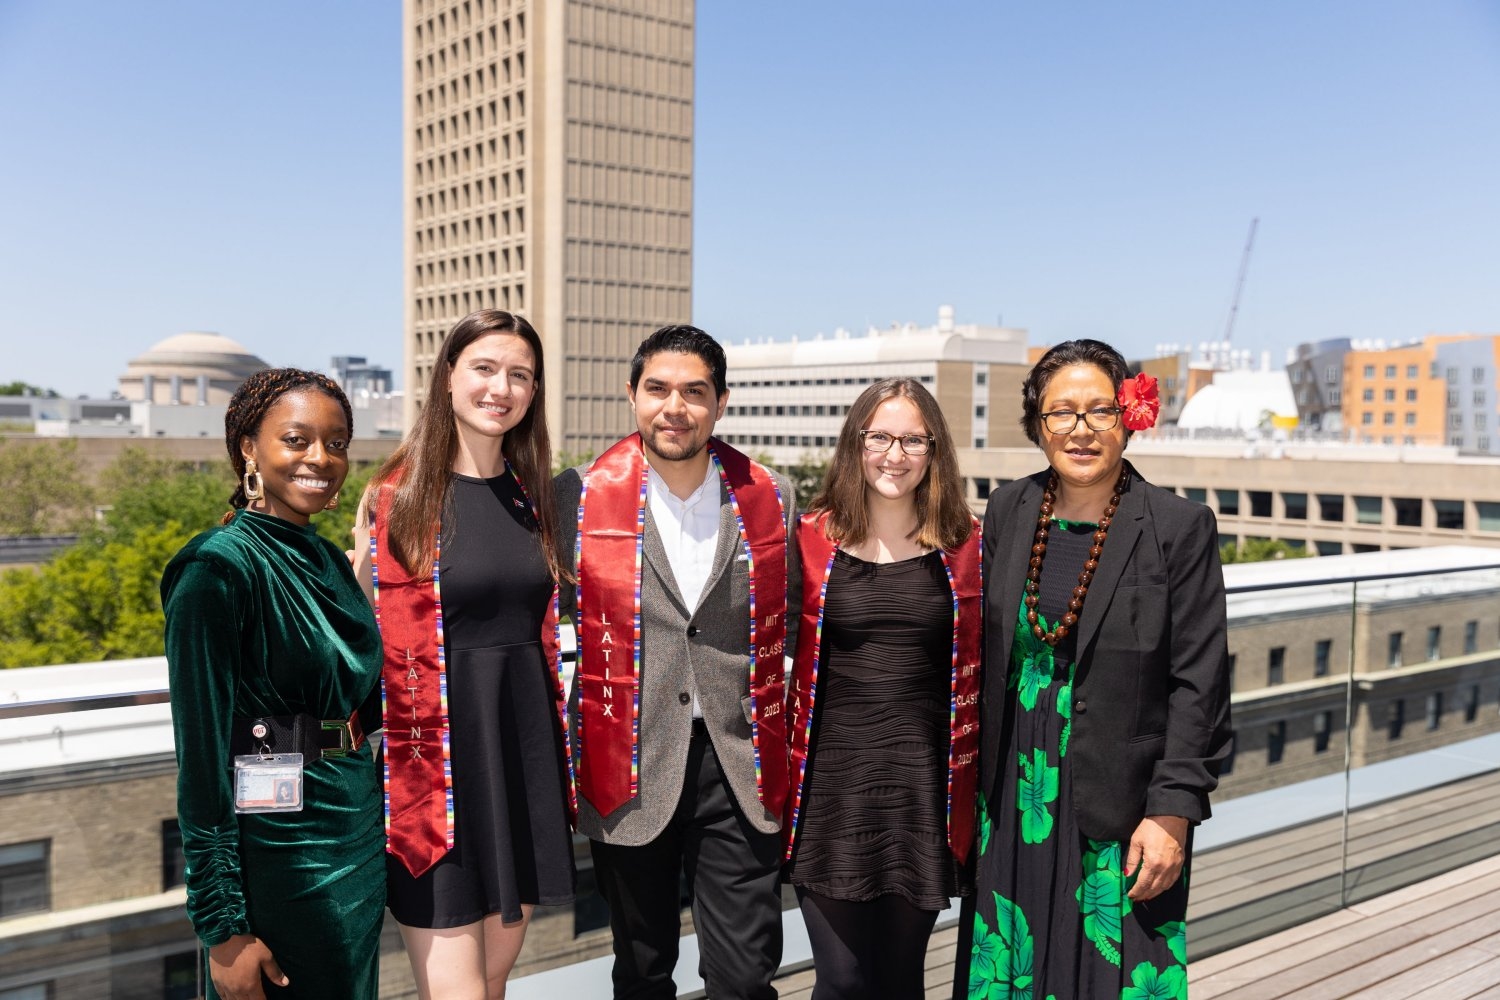 The inaugural MIT Latinx Graduation was held May 31 at the Media Lab. Seen here, left to right: Alma Jam, assistant director of intercultural engagement; Veronica Perdomo, vice president of the Latino Cultural Center (LCC); Albert Fernandez, president of the Latinx Graduate Students Association; Isabella Salinas, president of the LCC; and Moana Bentin, senior associate director of identity-based alumni communities.